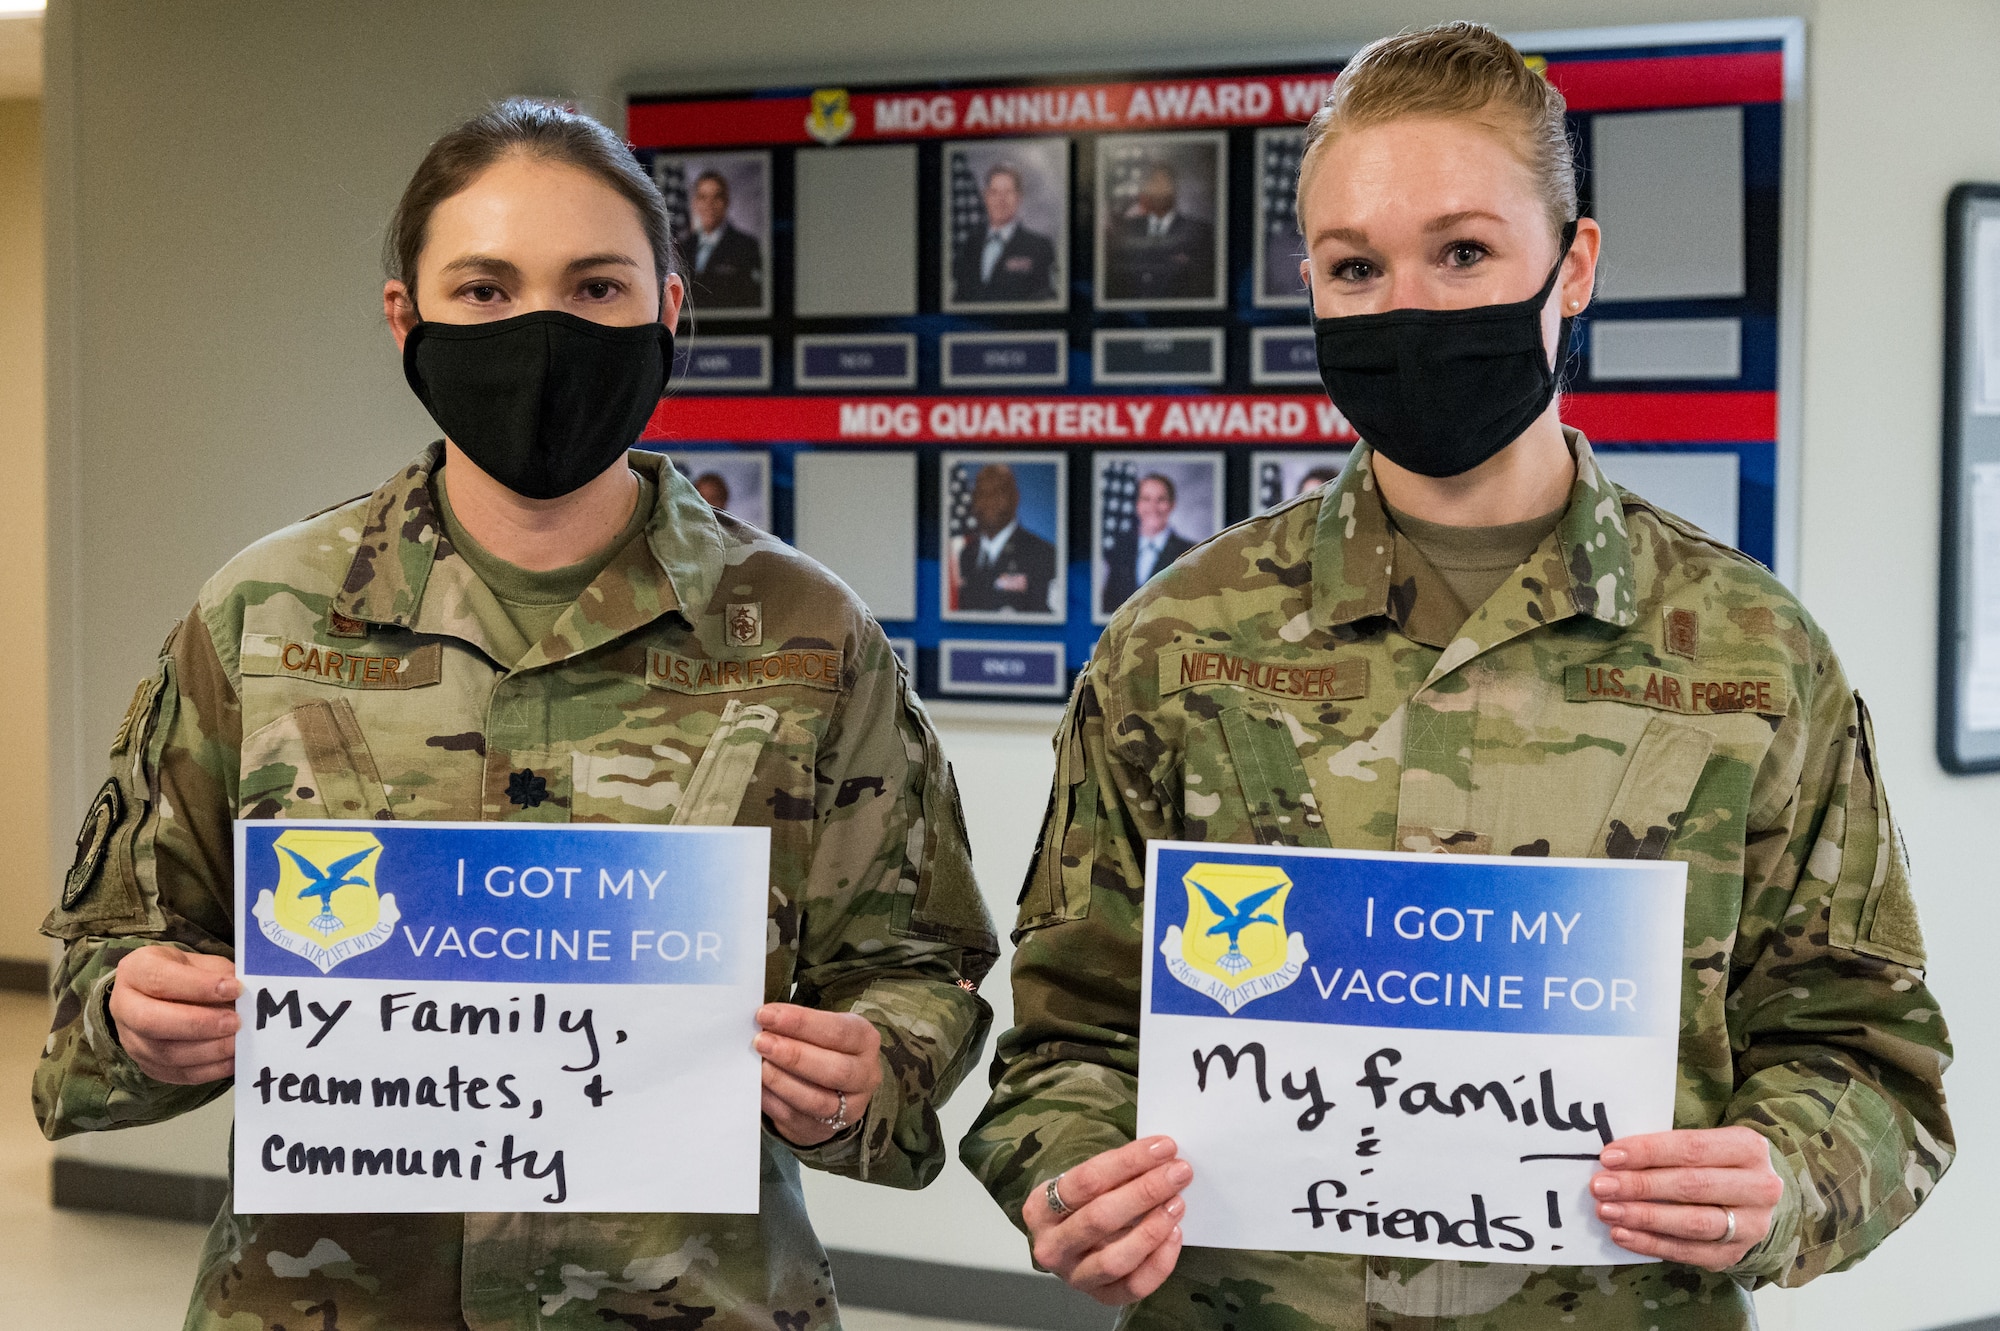 Lt. Col. Kristen Carter, 436th Medical Support Squadron commander, and Master Sgt. Jessica Nienhueser, 436th MDSS superintendent, display their signs stating why they volunteered for the COVID-19 vaccine on Jan. 21, 2021, at Dover Air Force Base, Delaware. Carter and Nienhueser were among the first Team Dover front-line workers who voluntarily received the vaccine in accordance with Department of Defense guidance. The vaccine was granted emergency use authorization by the U.S. Food and Drug Administration for use in prevention of COVID-19. (U.S. Air Force photo by Roland Balik)